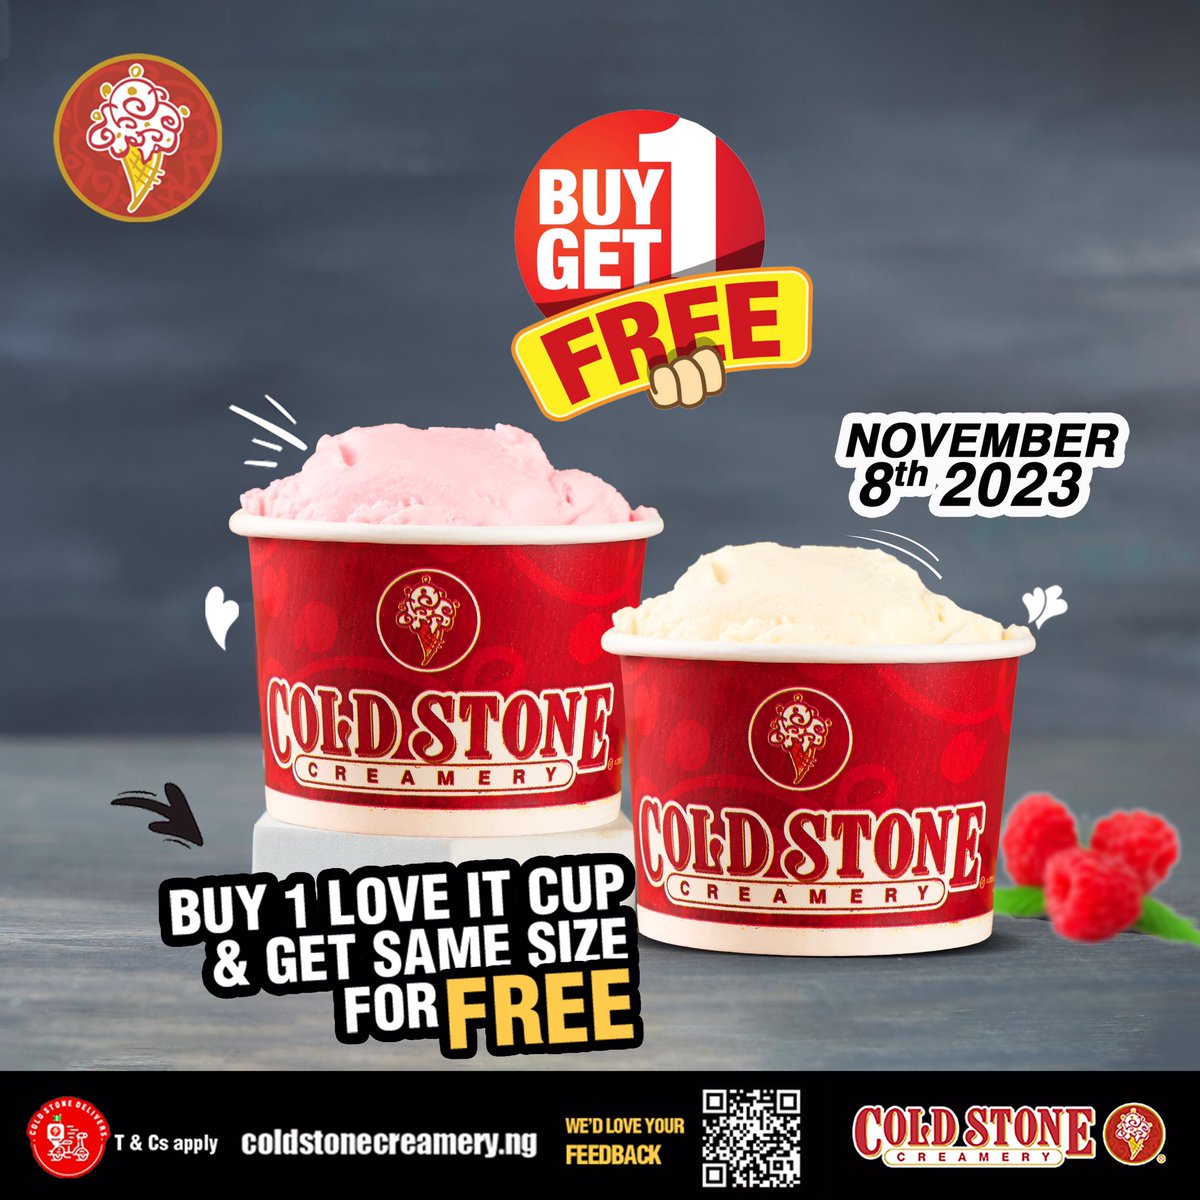 Happy New Month💃🏽🕺🏻 Ice cream lover🥰, enjoy 2 Love it cups of ice cream for the price of 1 with our Buy 1 Get 1 Free deal today!!😍💃 This offer is valid today only, the 8th of November across all Cold Stone NG stores, and valid on Love it cup size📢📢 Hurry to the closest…